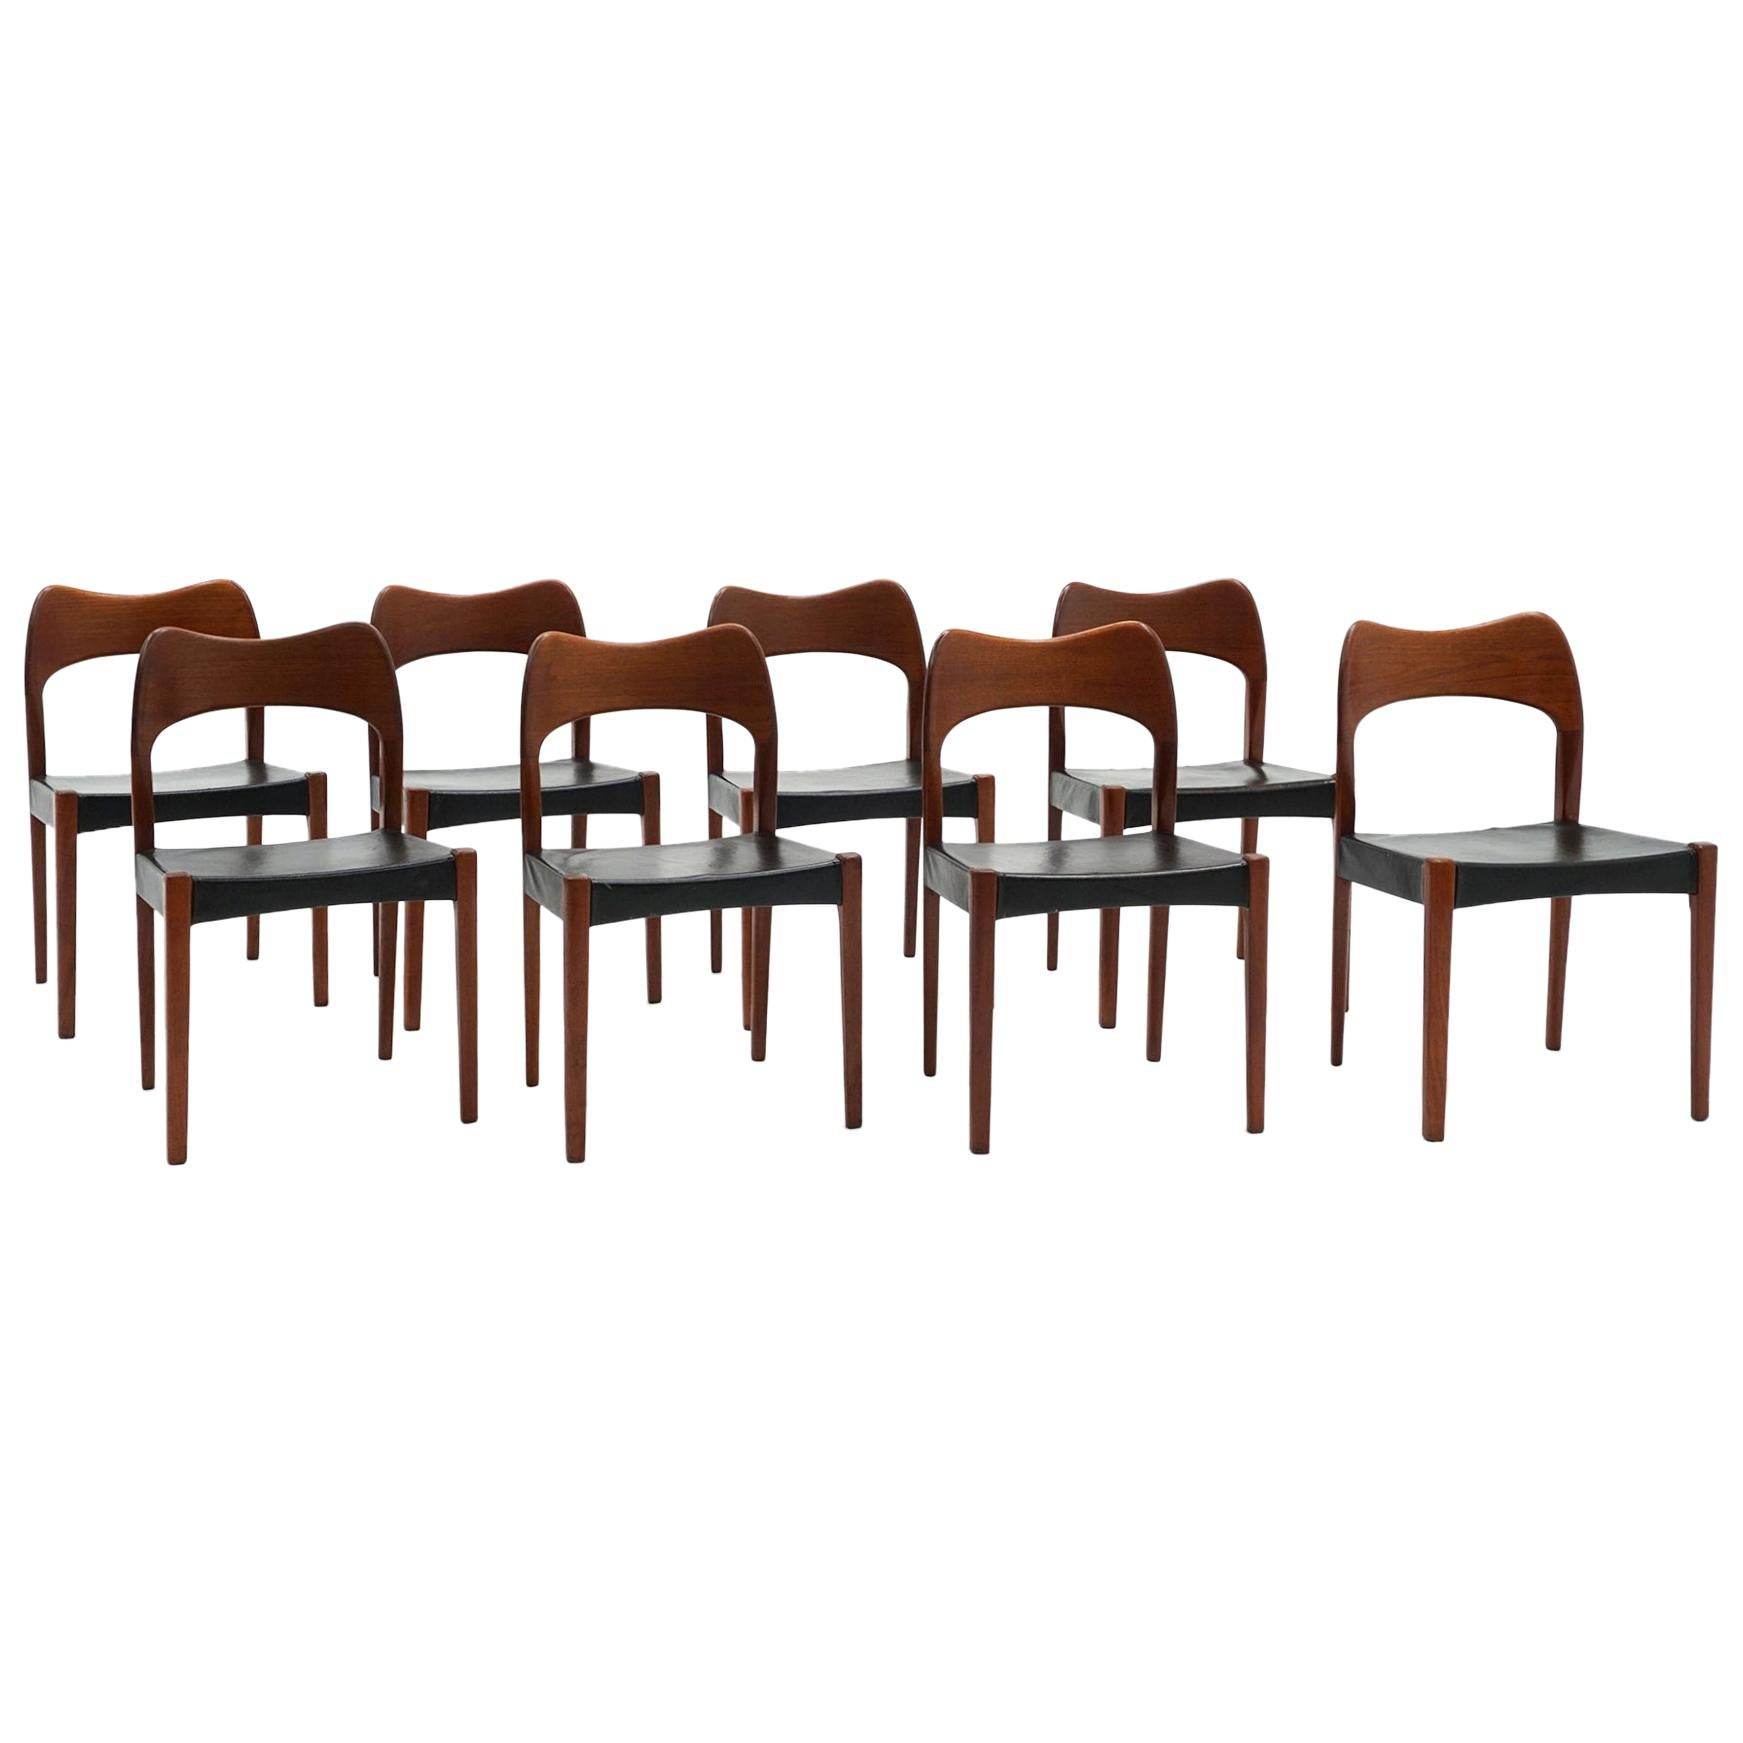 Eight Teak with Black Leather Dining Chairs by Niels Otto Møller